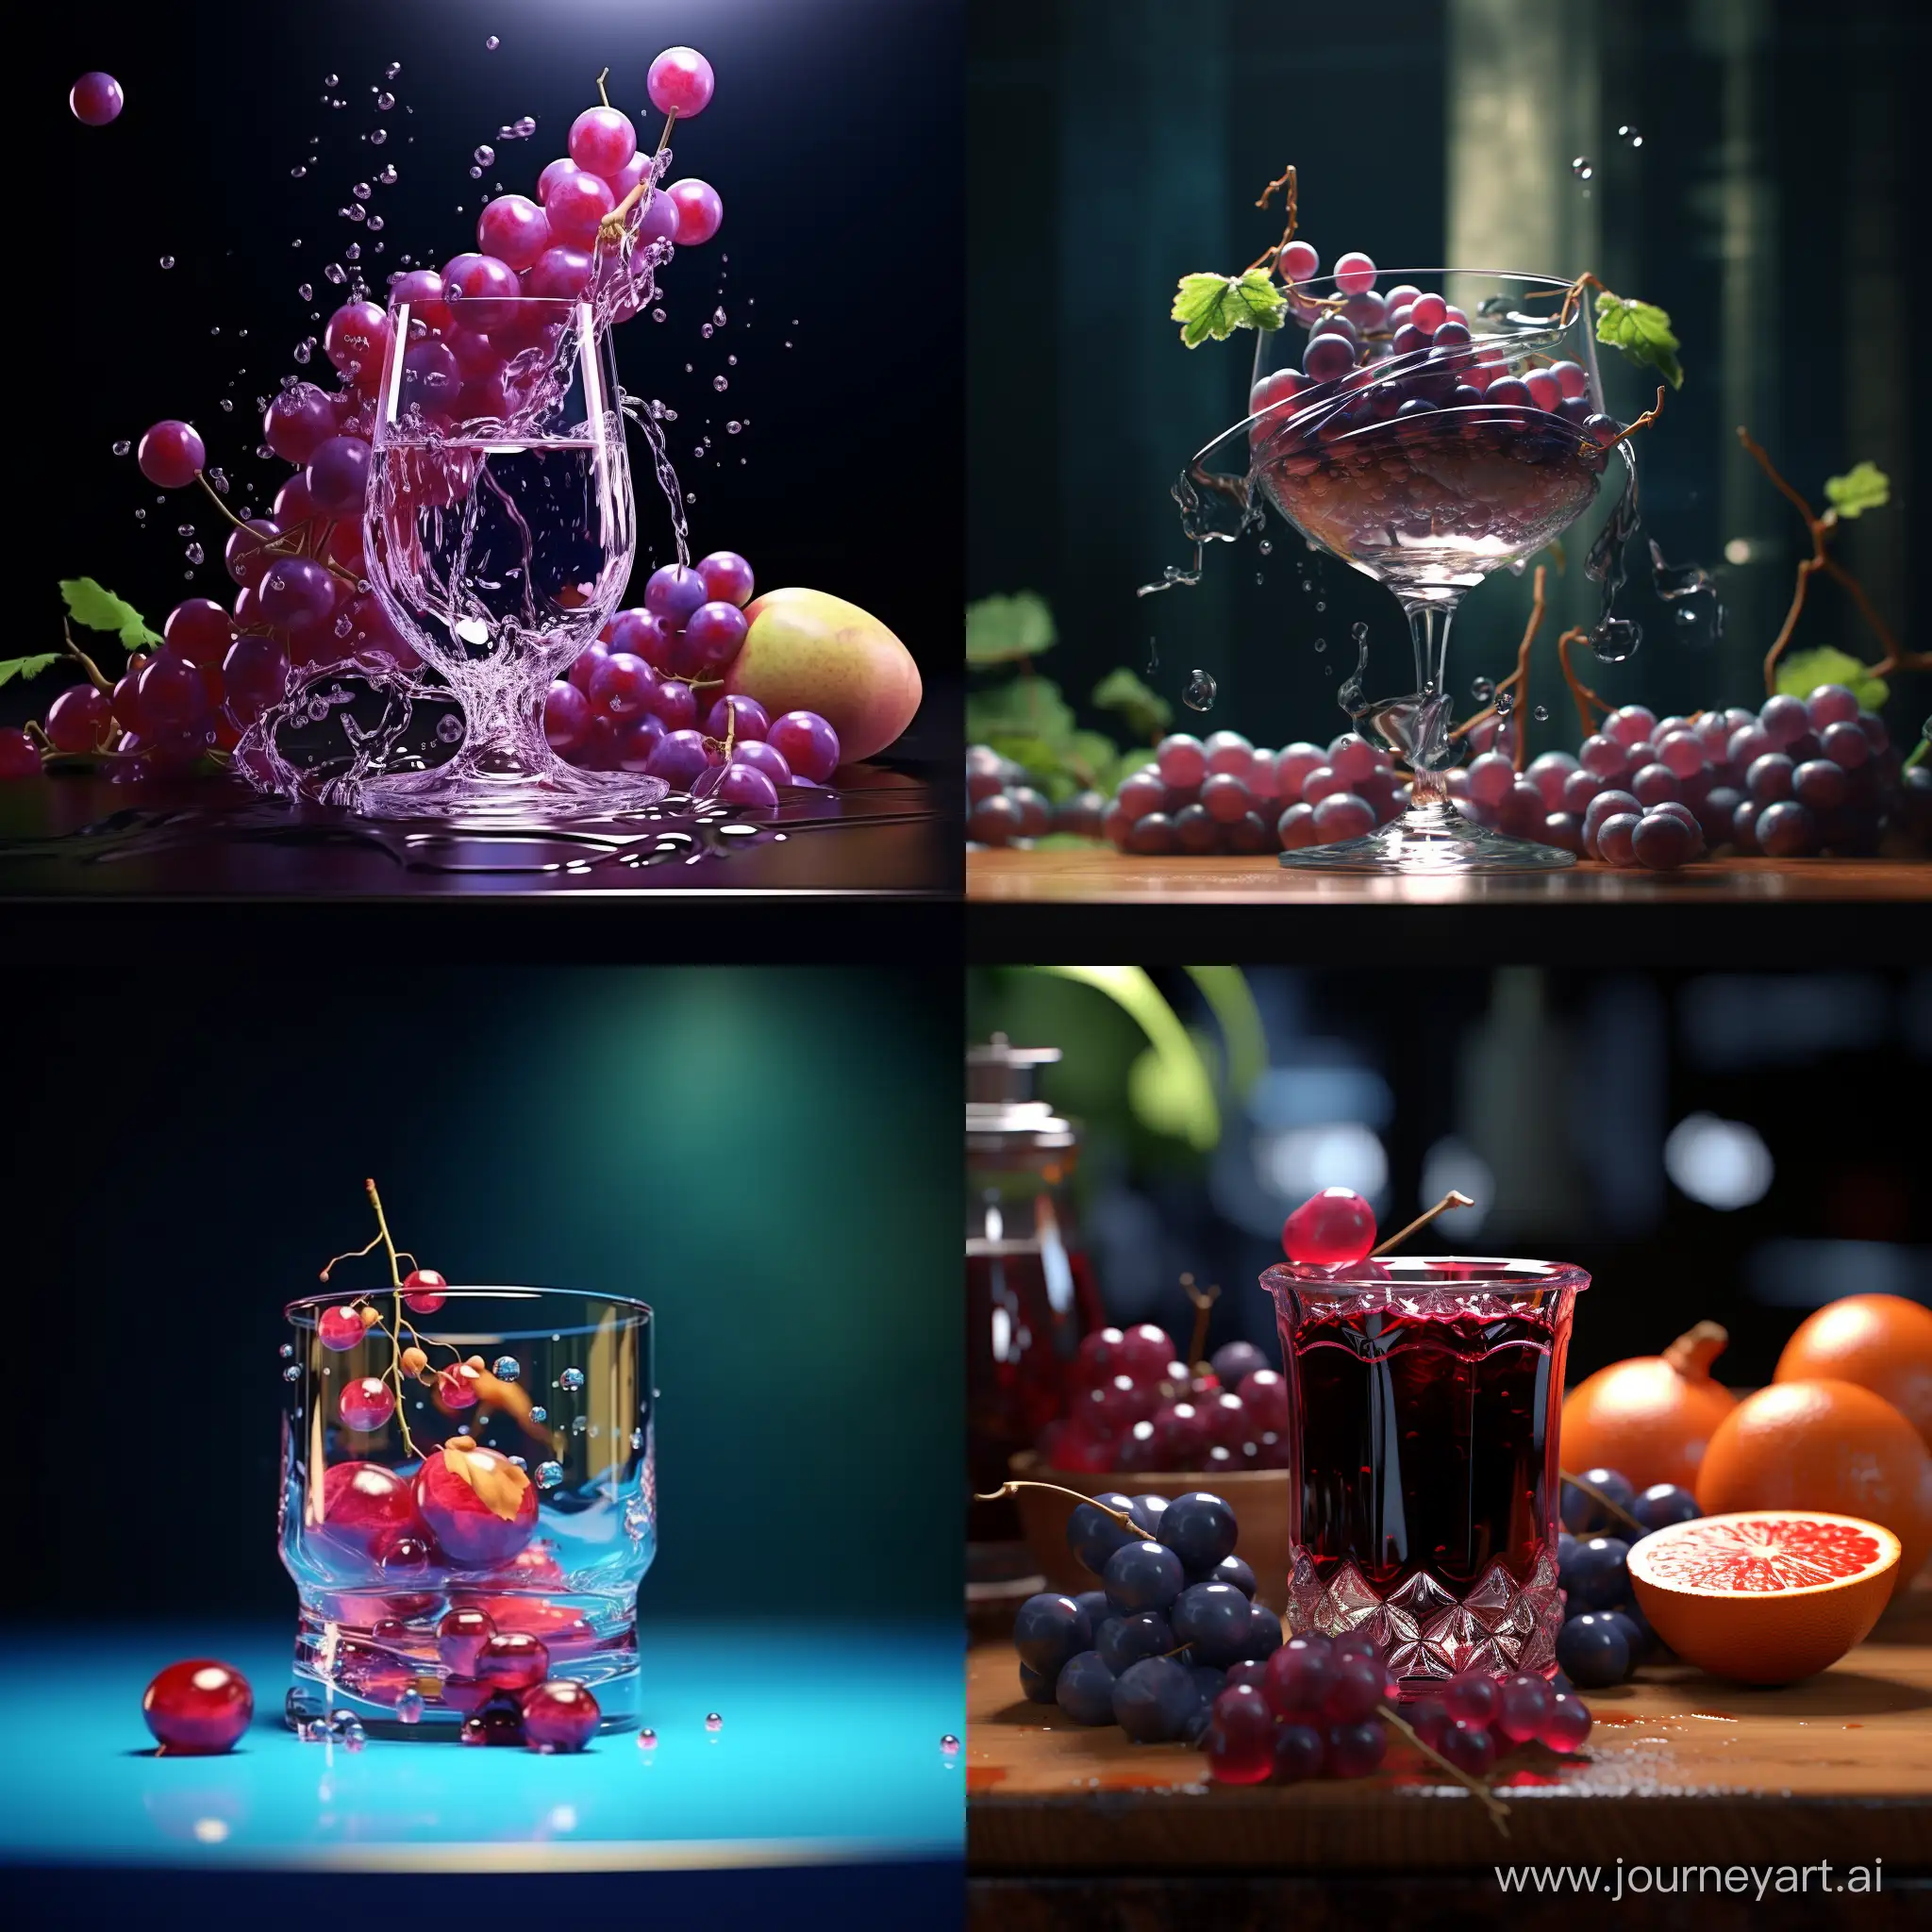 Surreal-3D-Animation-Captivating-Grapes-in-a-Glass